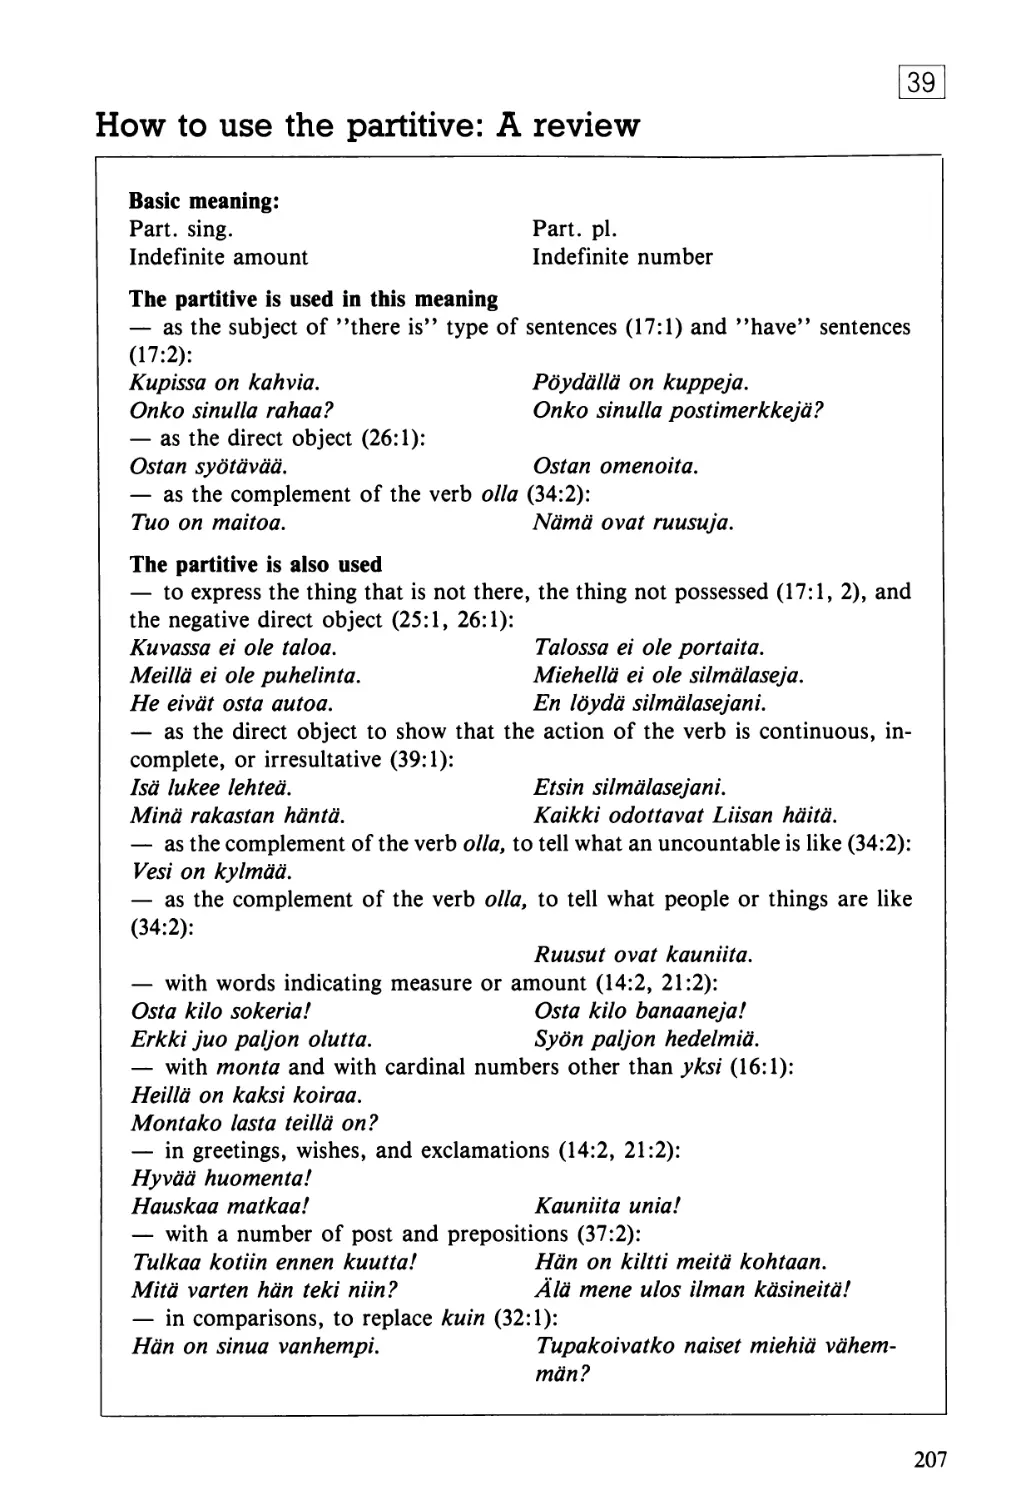 How to use the partitive: a review